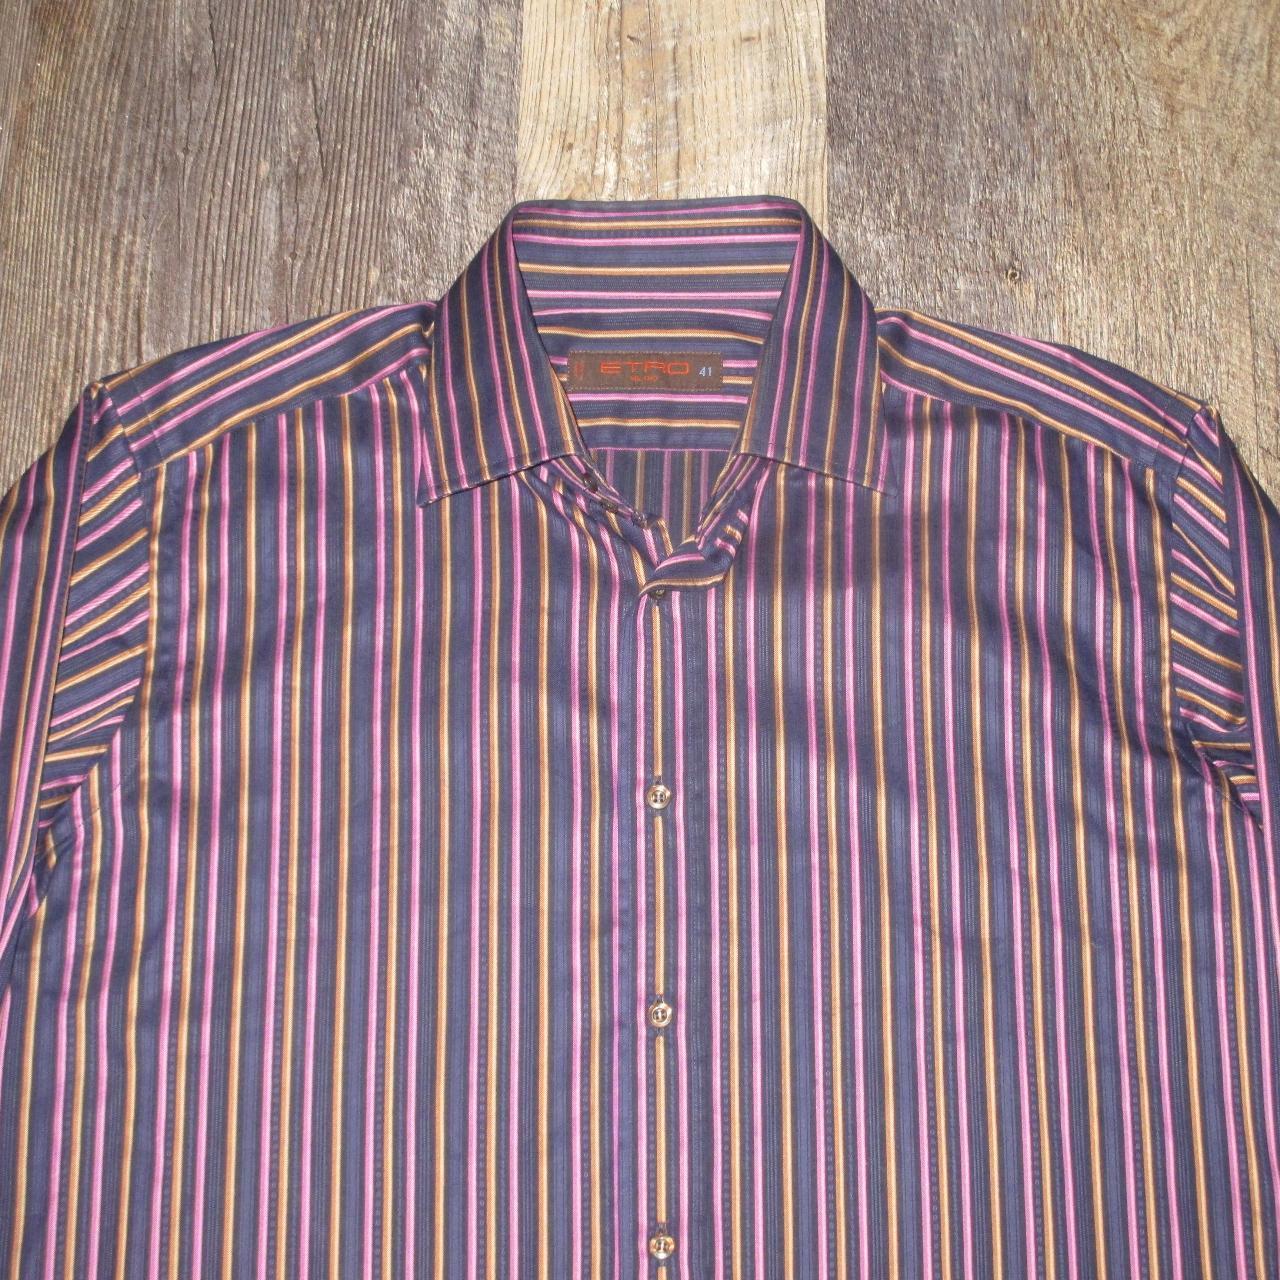 Etro Men's Pink and Gold Shirt